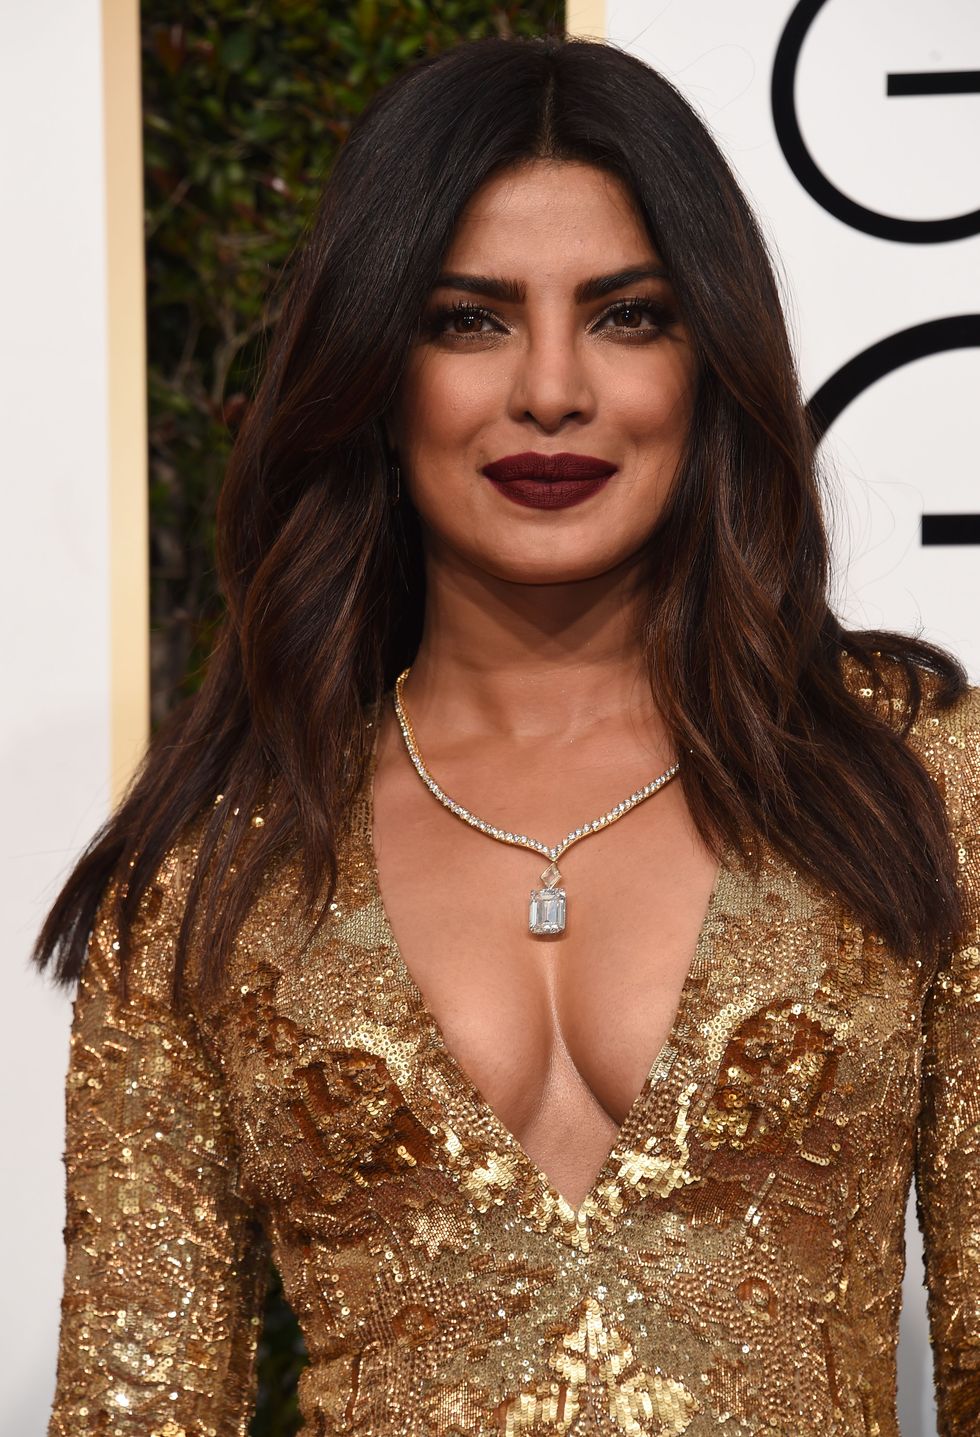 Priyanka Chopra arrives at the 74th annual Golden Globe Awards, January 8, 2017, at the Beverly Hilton Hotel in Beverly Hills, California.  / AFP / Valerie MACON        (Photo credit should read VALERIE MACON/AFP/Getty Images)